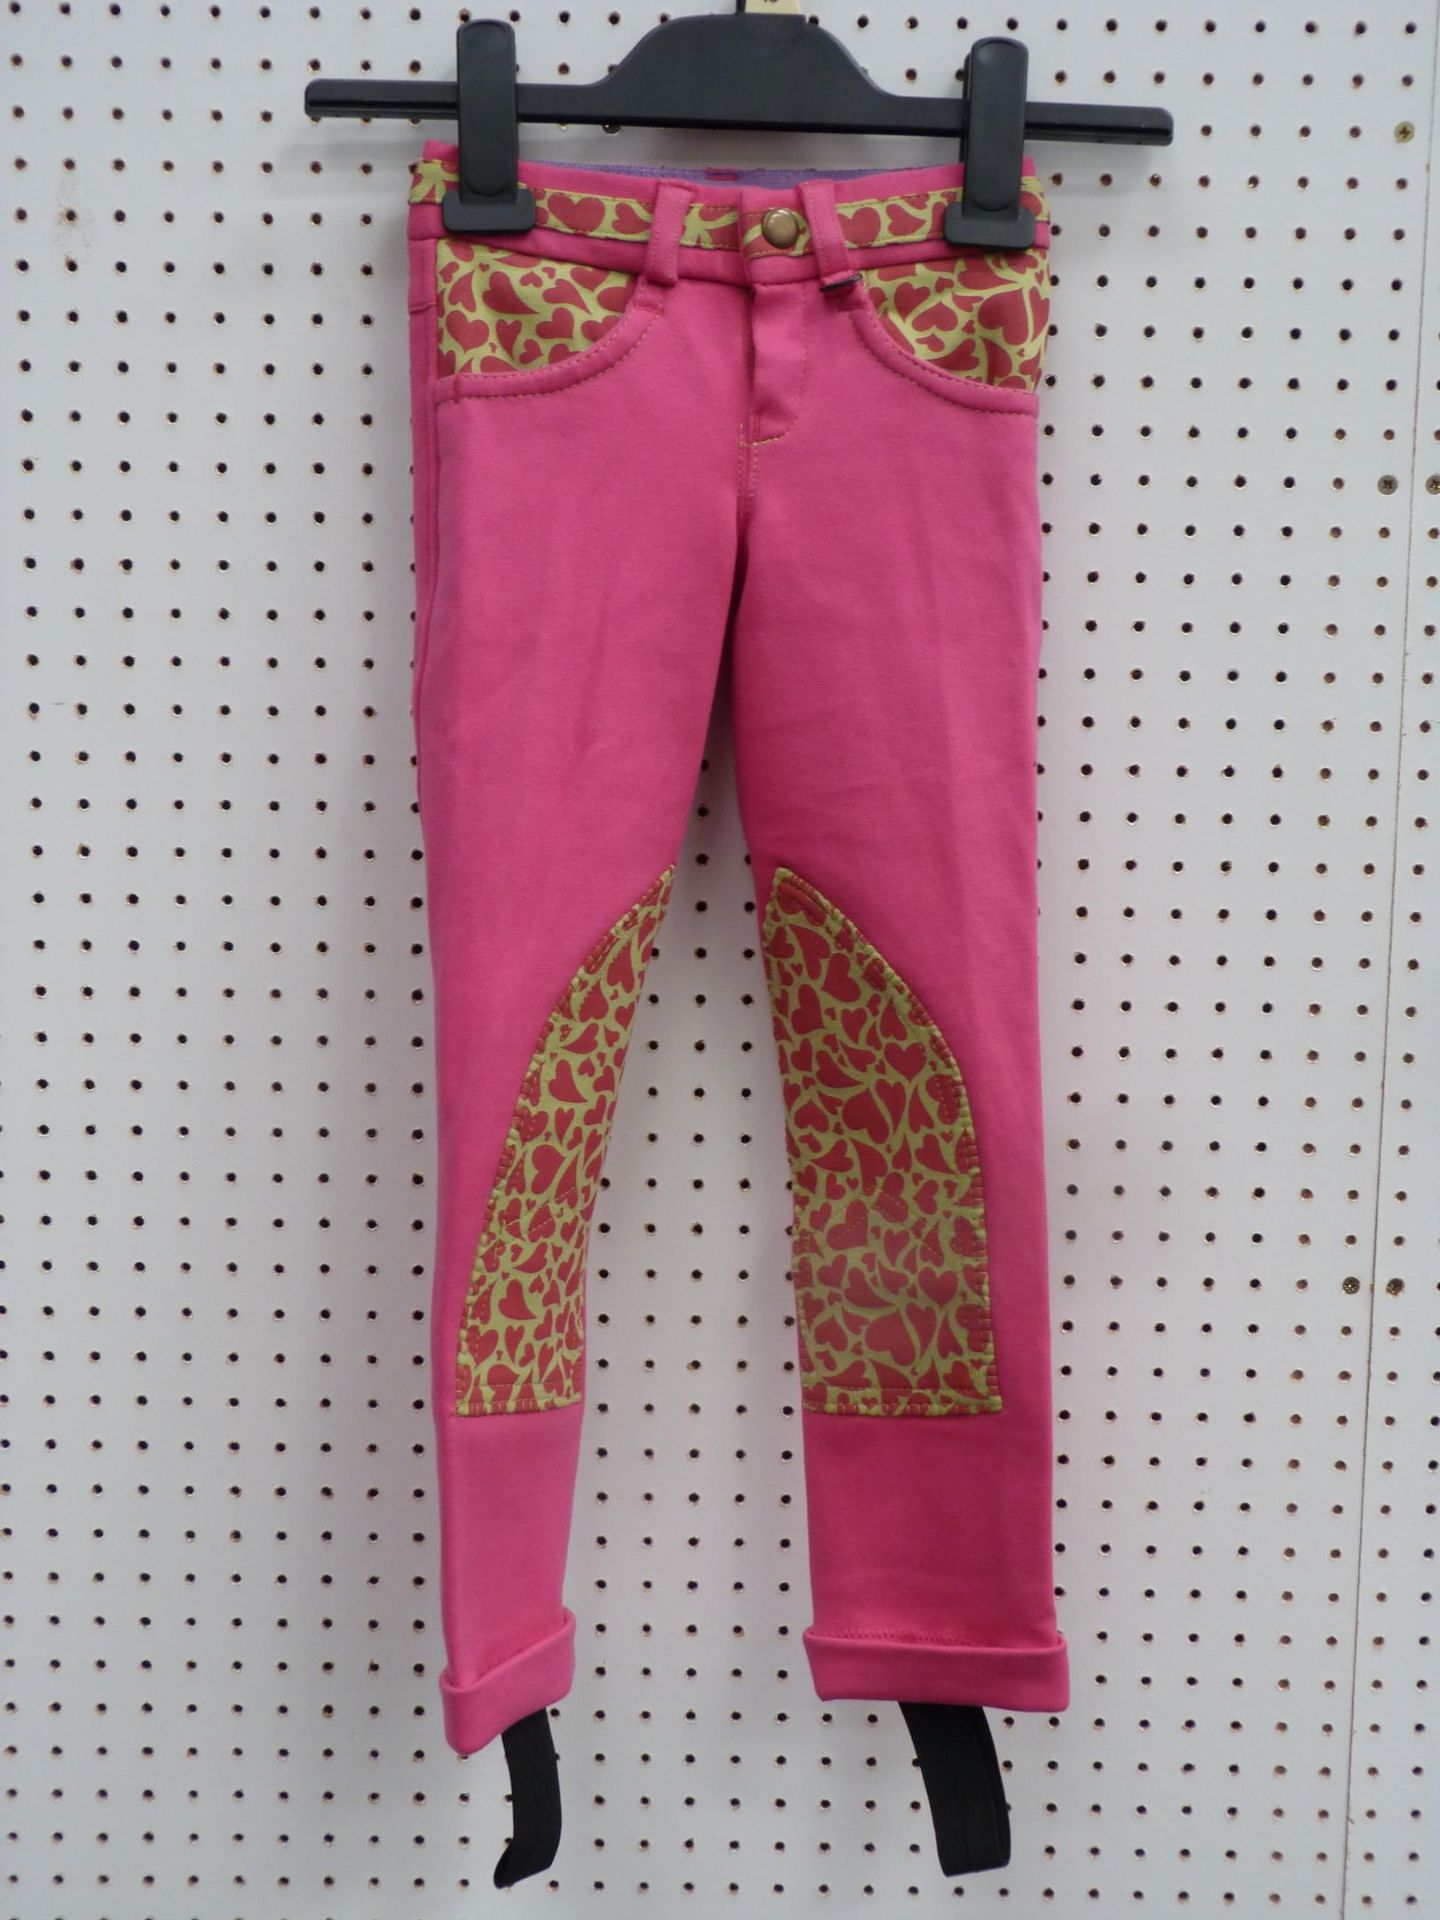 * Nine Pairs of ''Hoof It'' Garments. Two Childs Ascot Junior Hearts Jodhpurs in Pink/Lime size 18